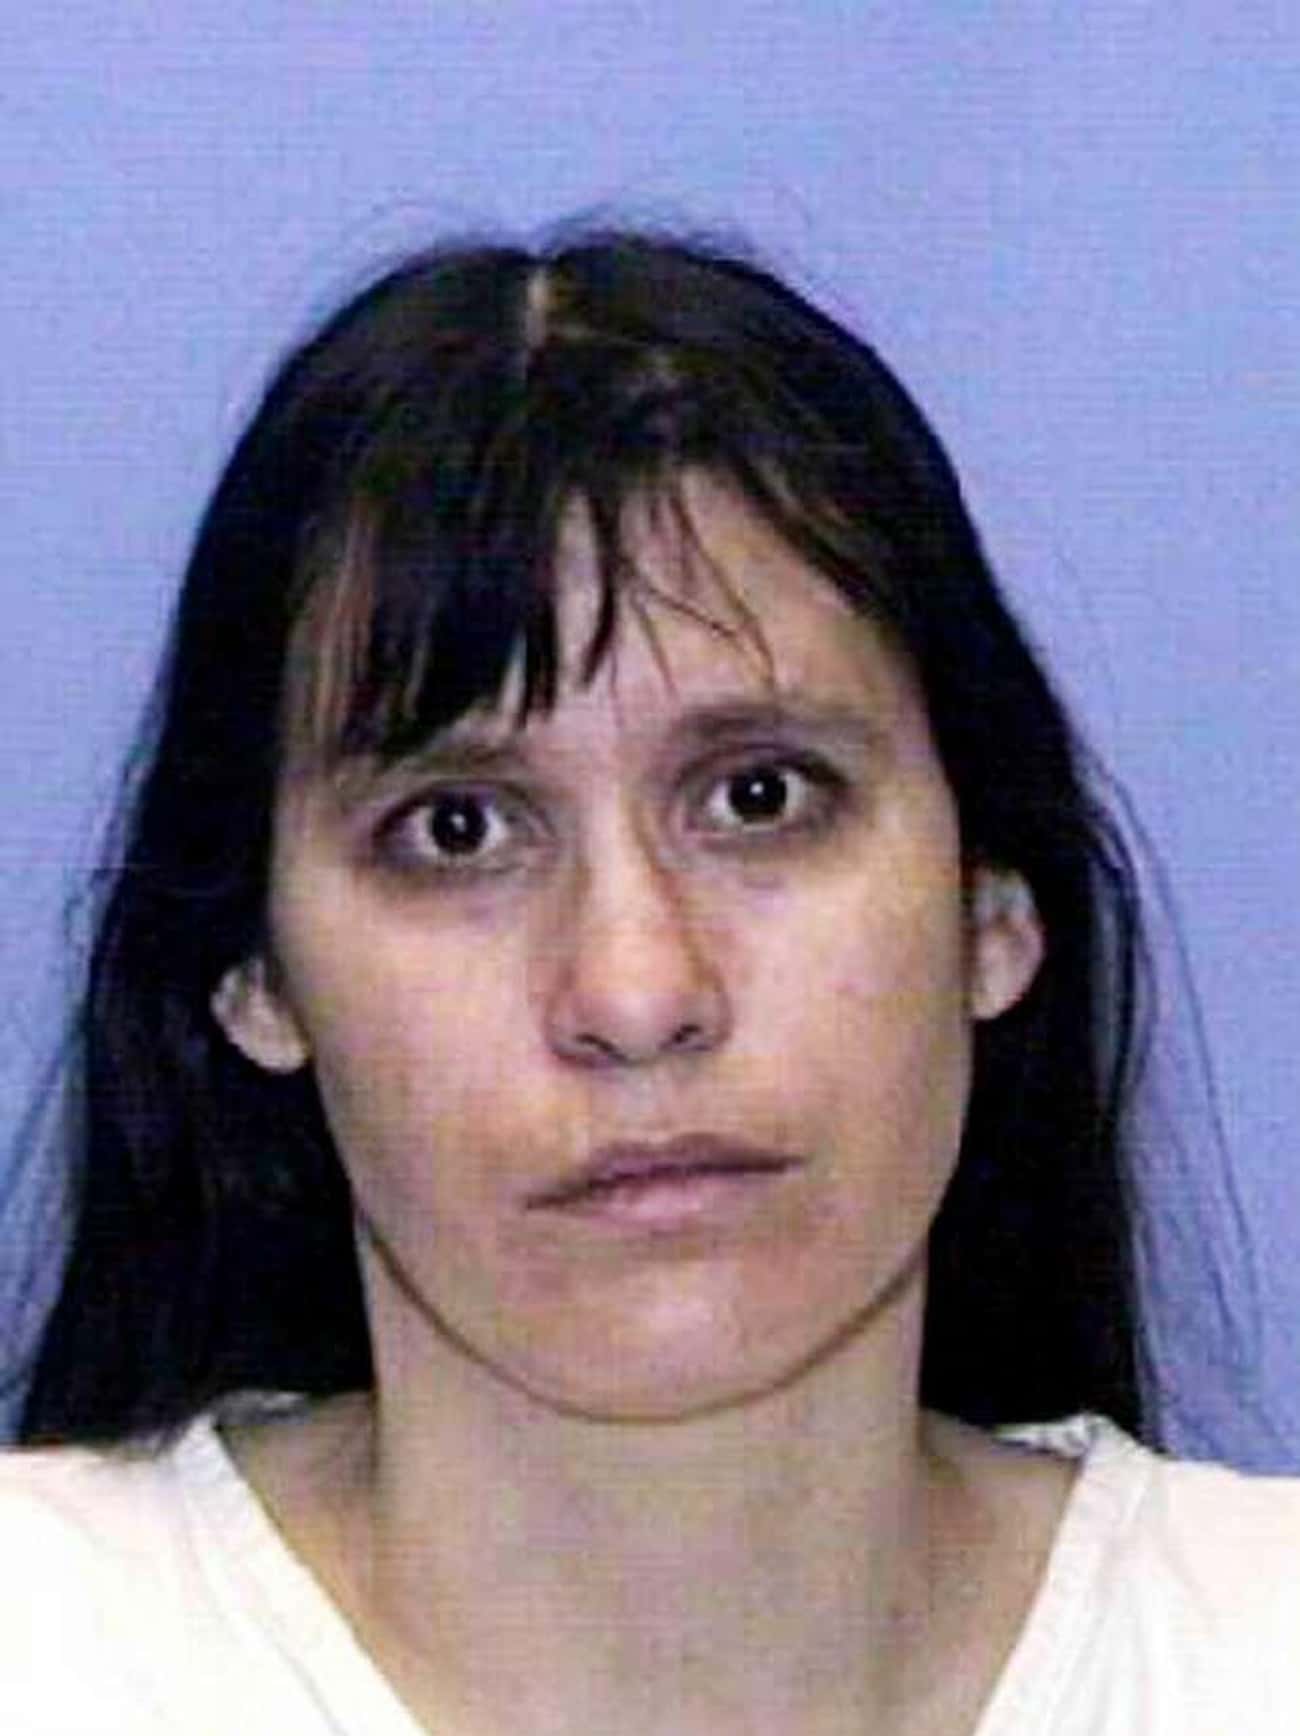 Andrea Yates Drowned Her Five Children